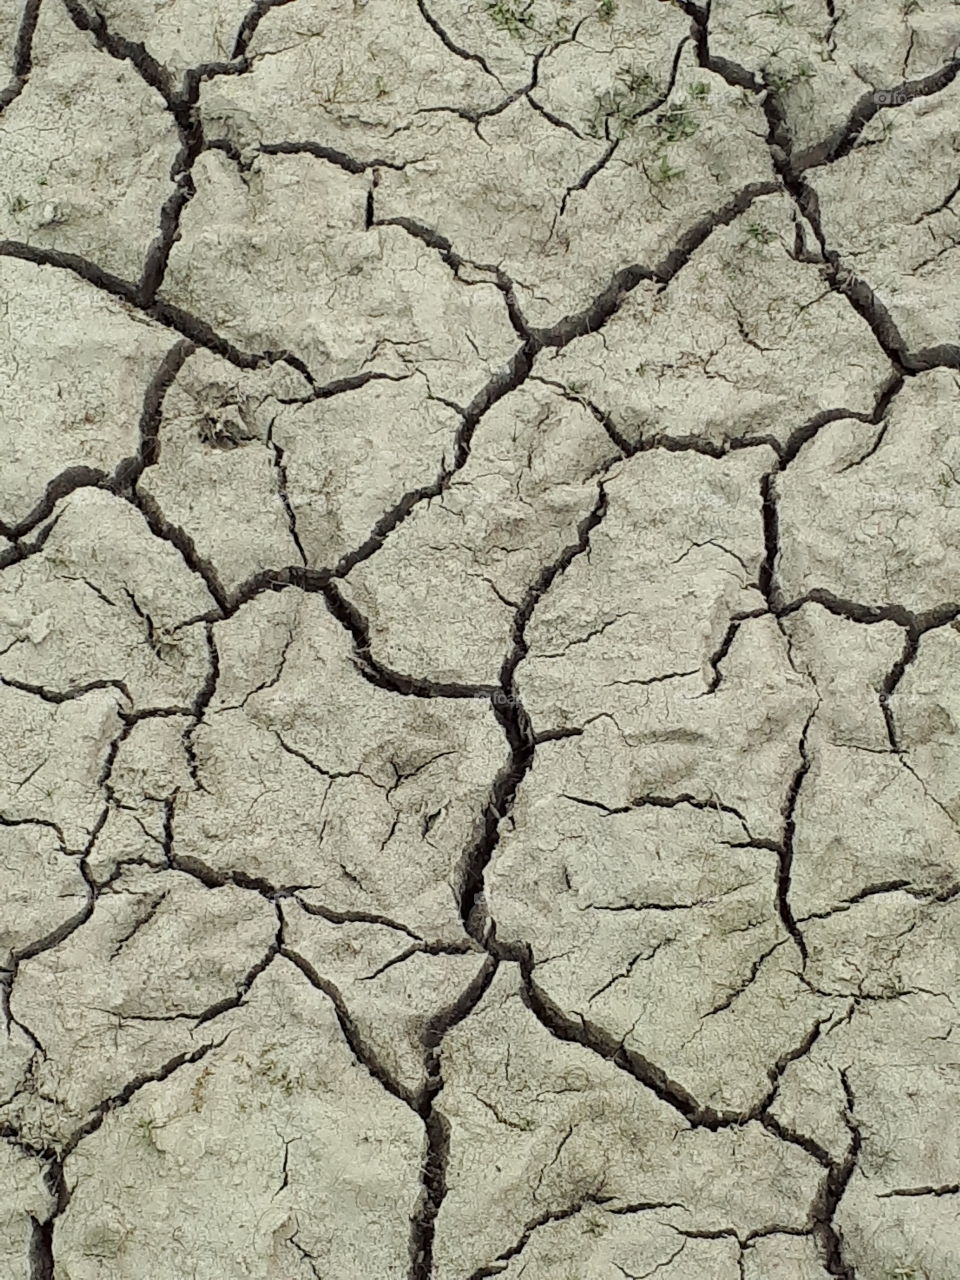 Drought conditions in Northern Australia